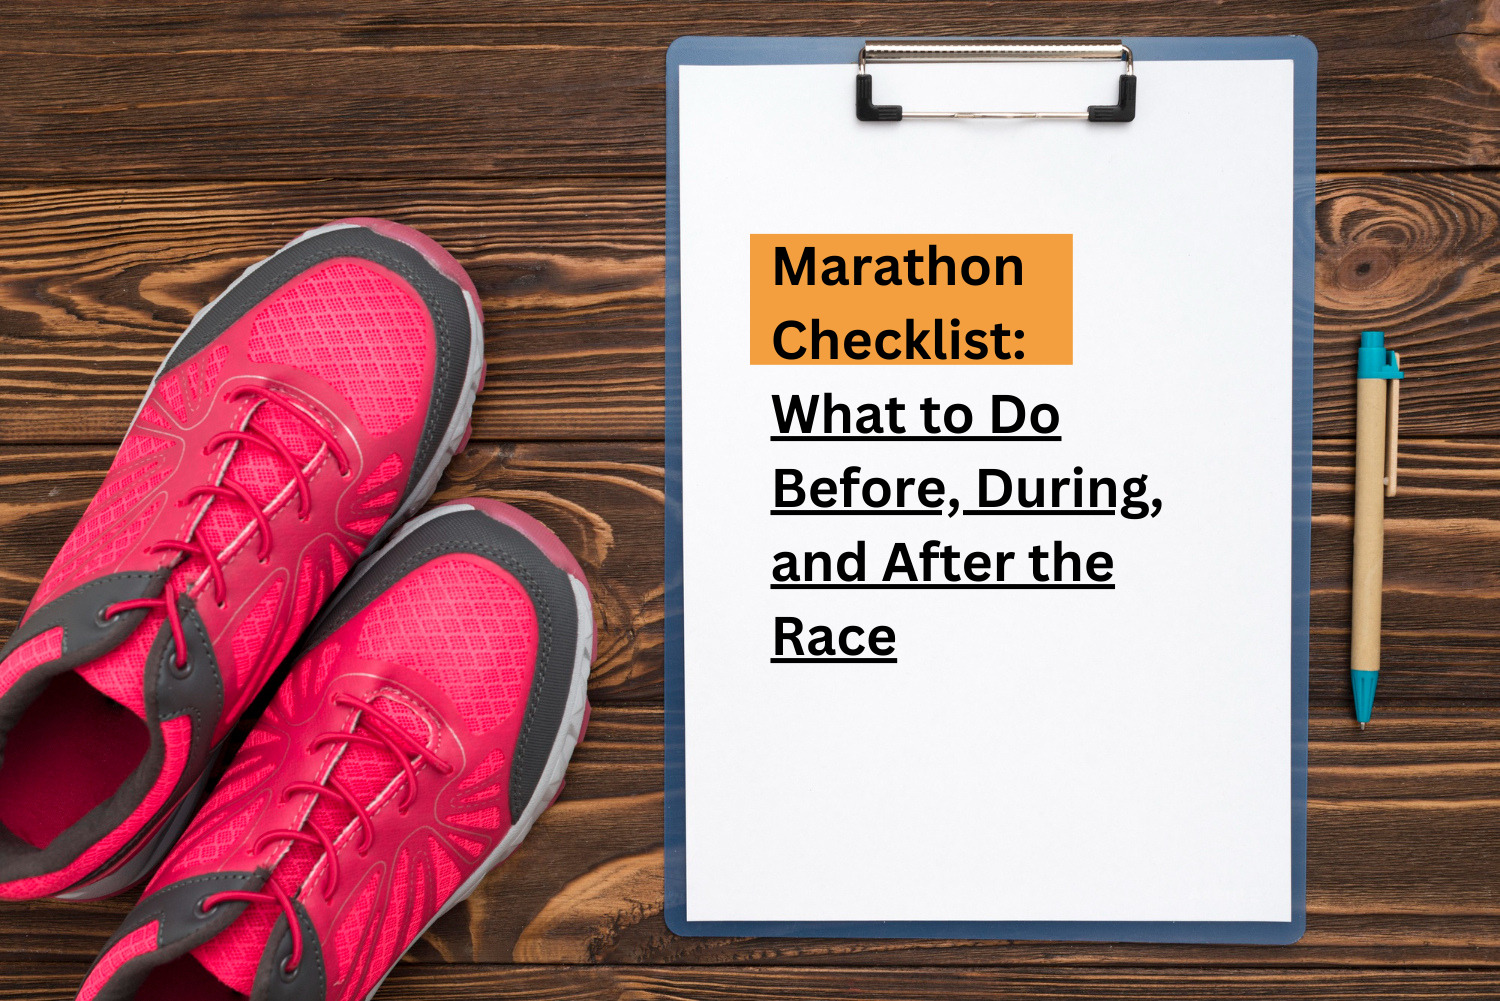 Marathon Checklist What to Do Before, During, and After the Race